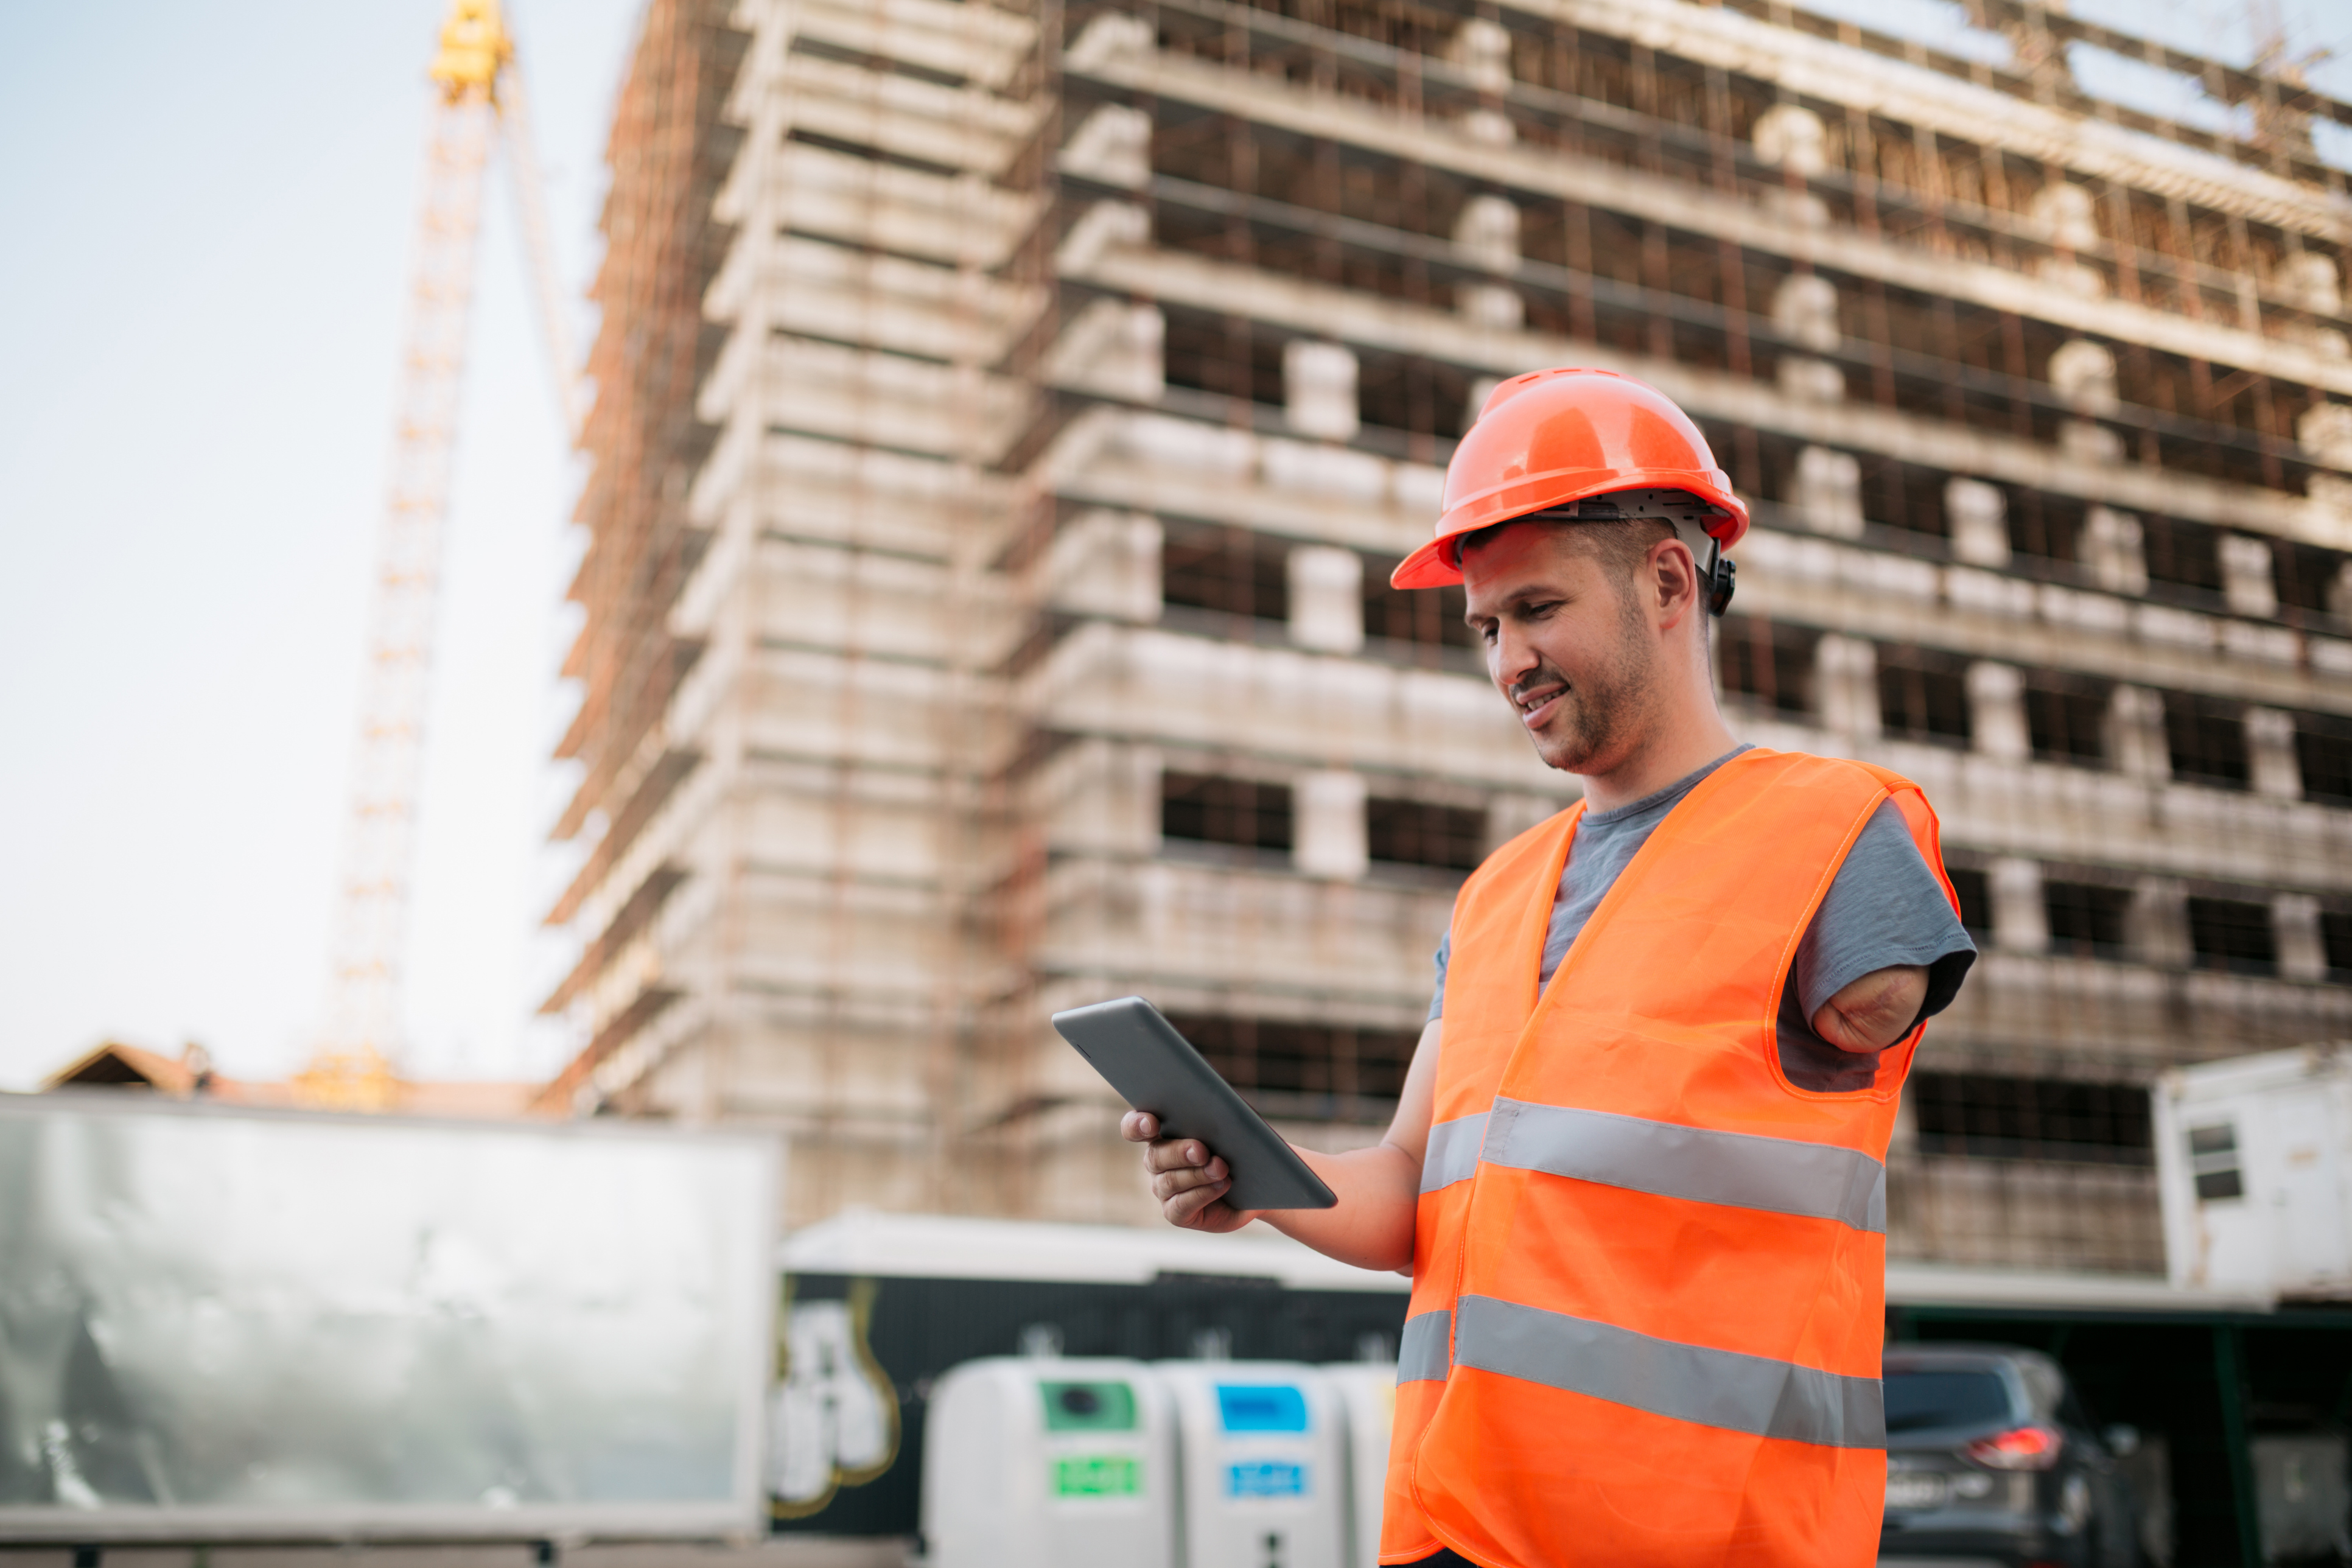 A construction worker with a limb difference in an orange hard hat and vest reads from a tablet in front of a construction site.